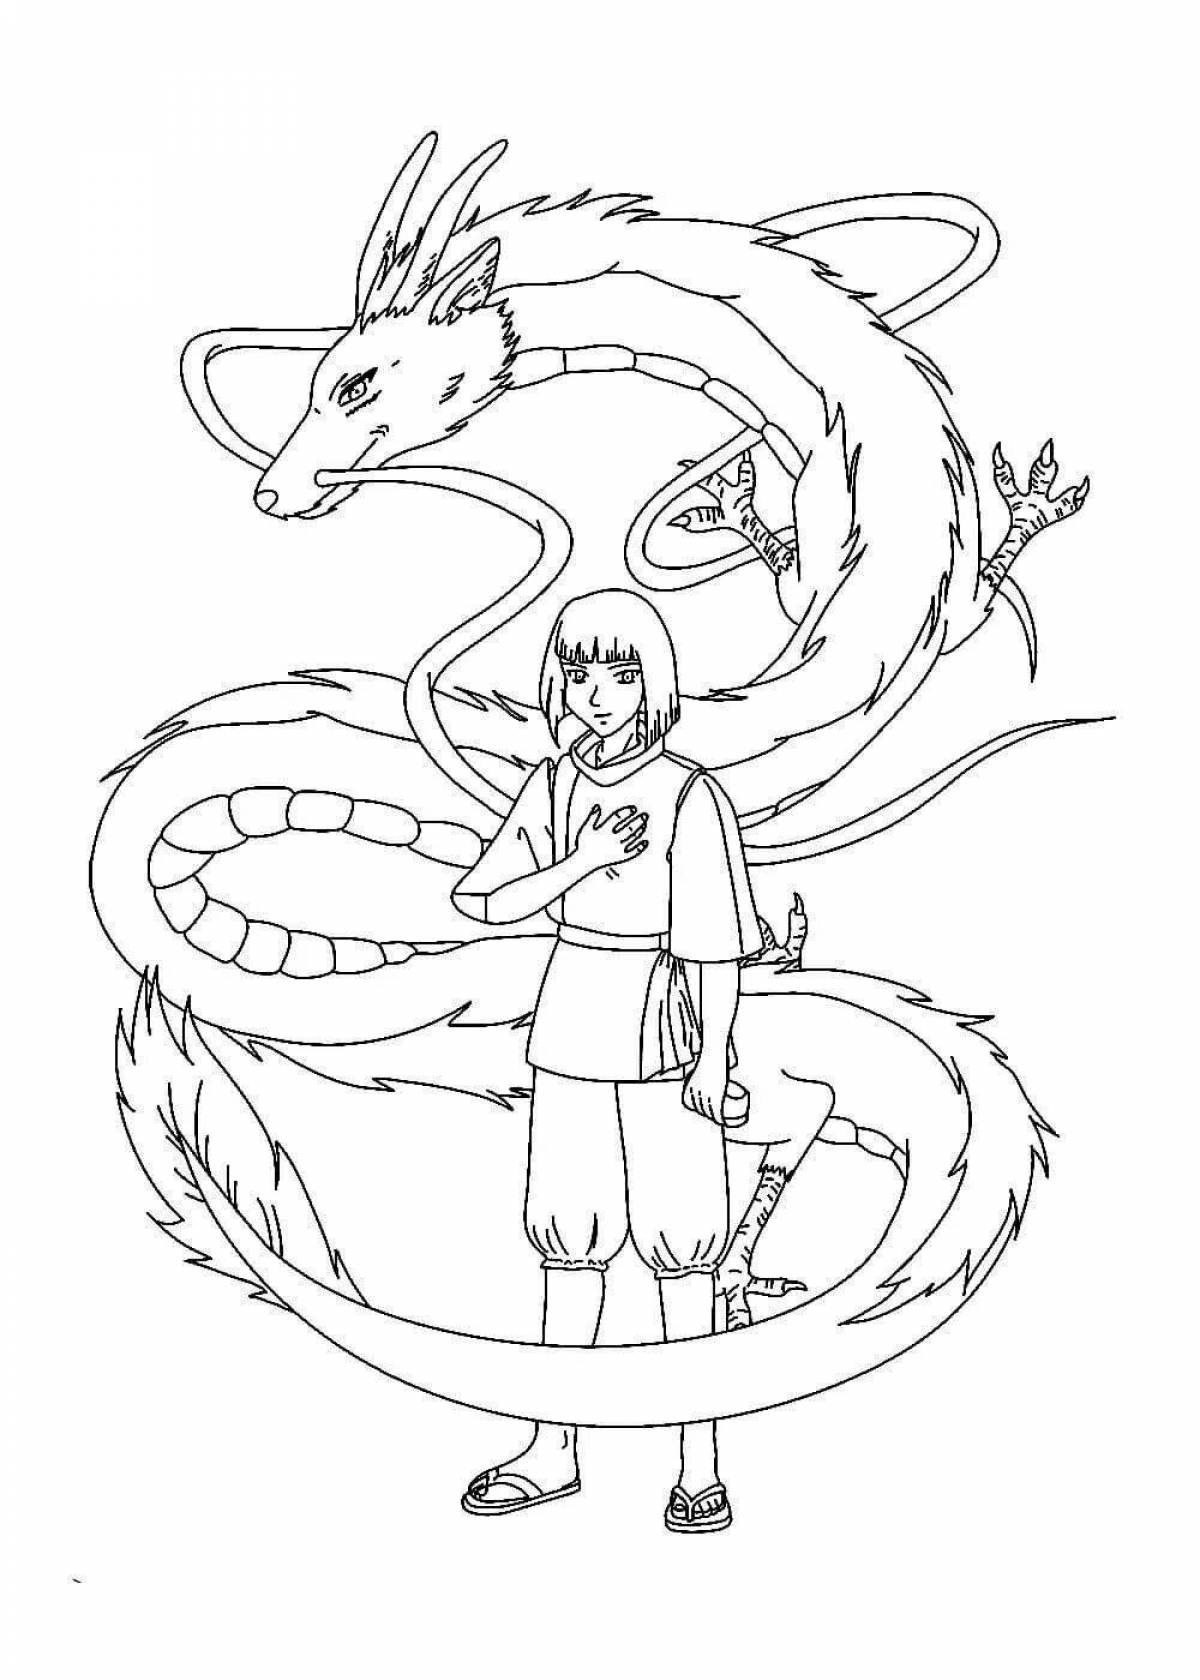 Chihiro and Haku's gorgeous coloring book